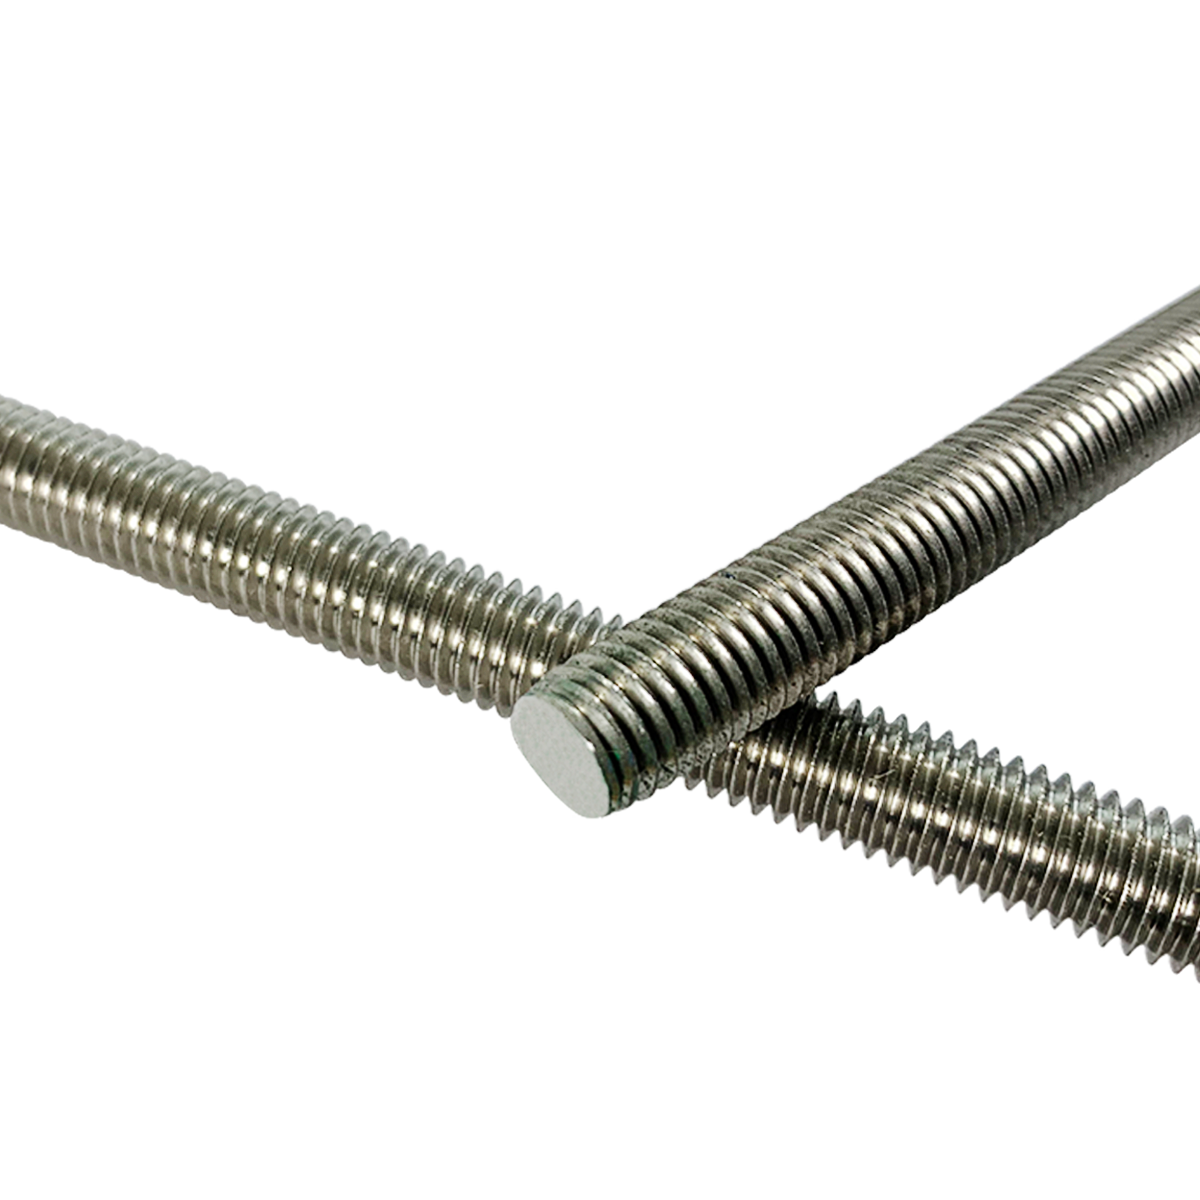 UNF A2 stainless steel threaded bar. Available in various diameters at competitive prices with Fusion Fixings